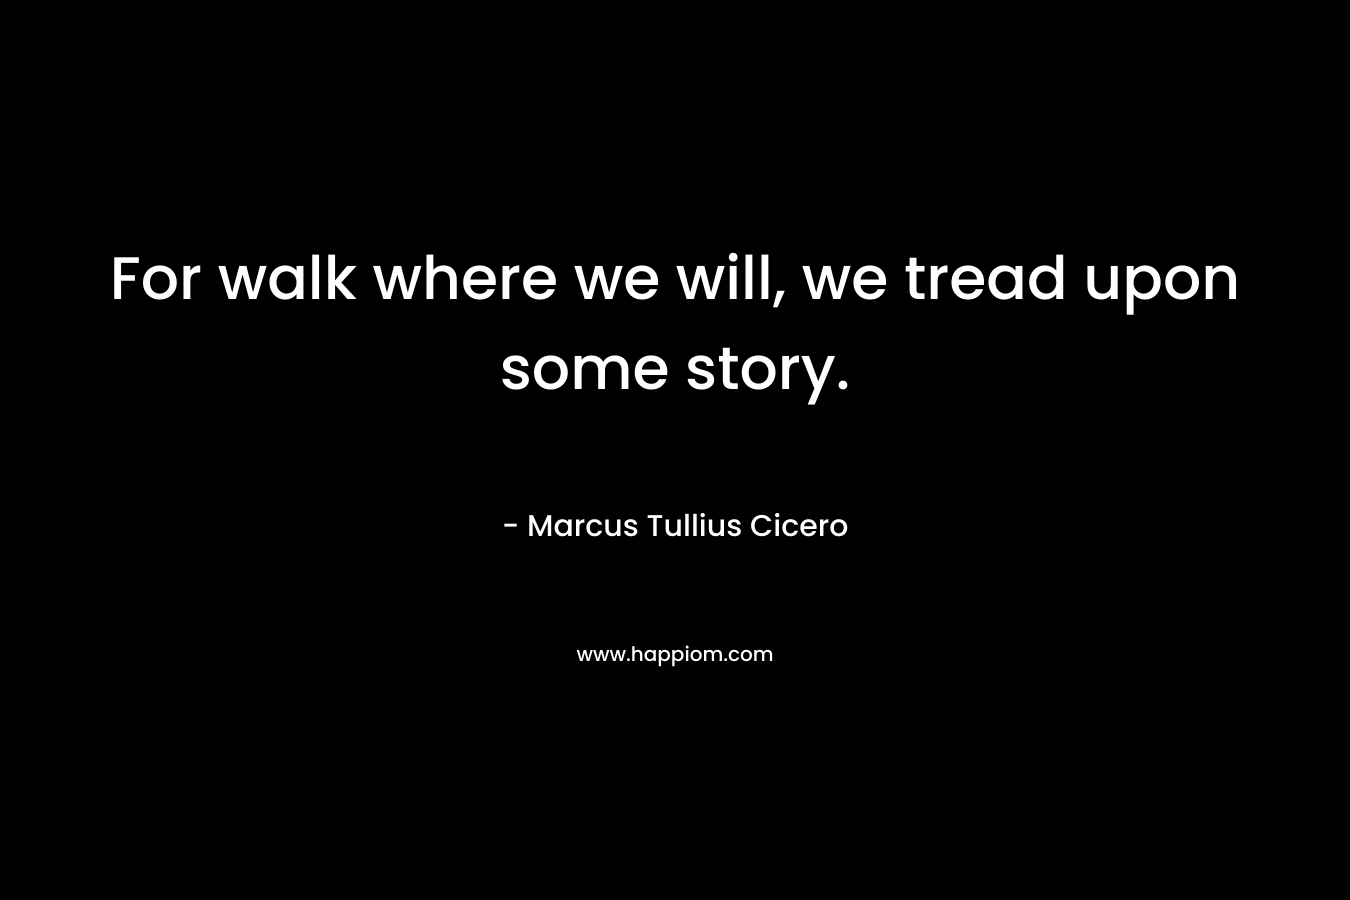 For walk where we will, we tread upon some story.